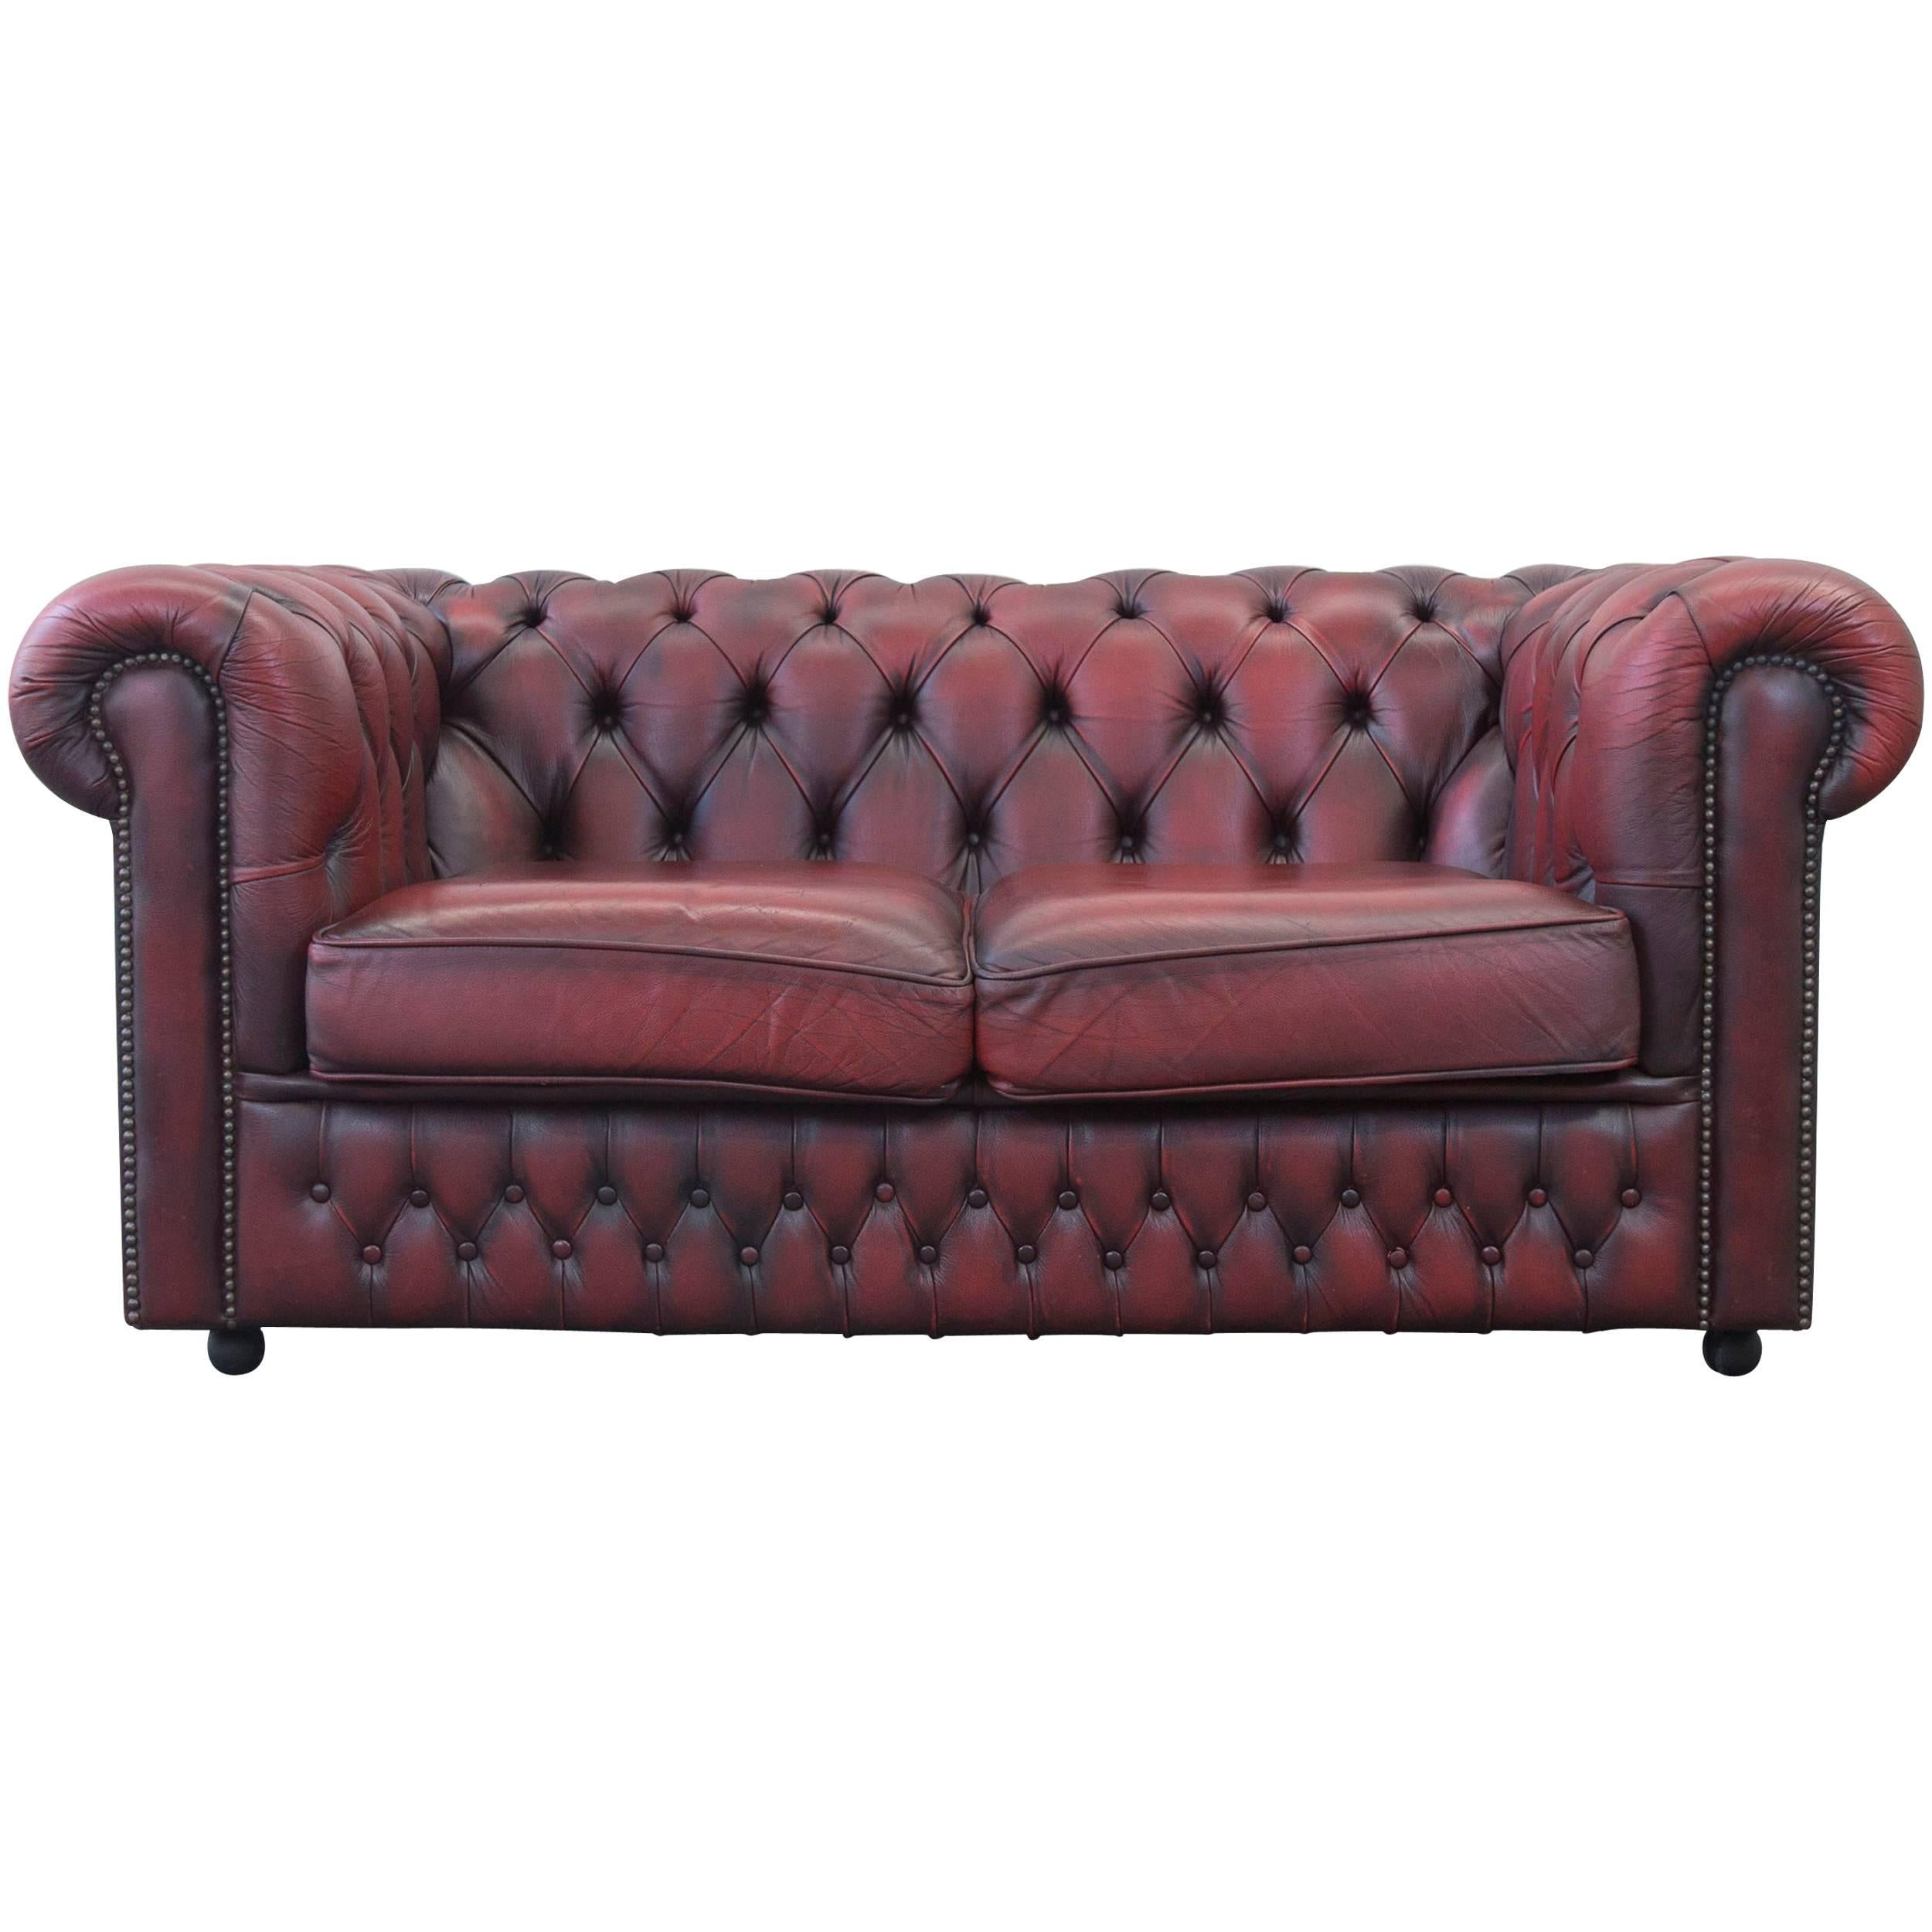 Chesterfield Leather Sofa Oxblood Red Two-Seat Couch Vintage Retro